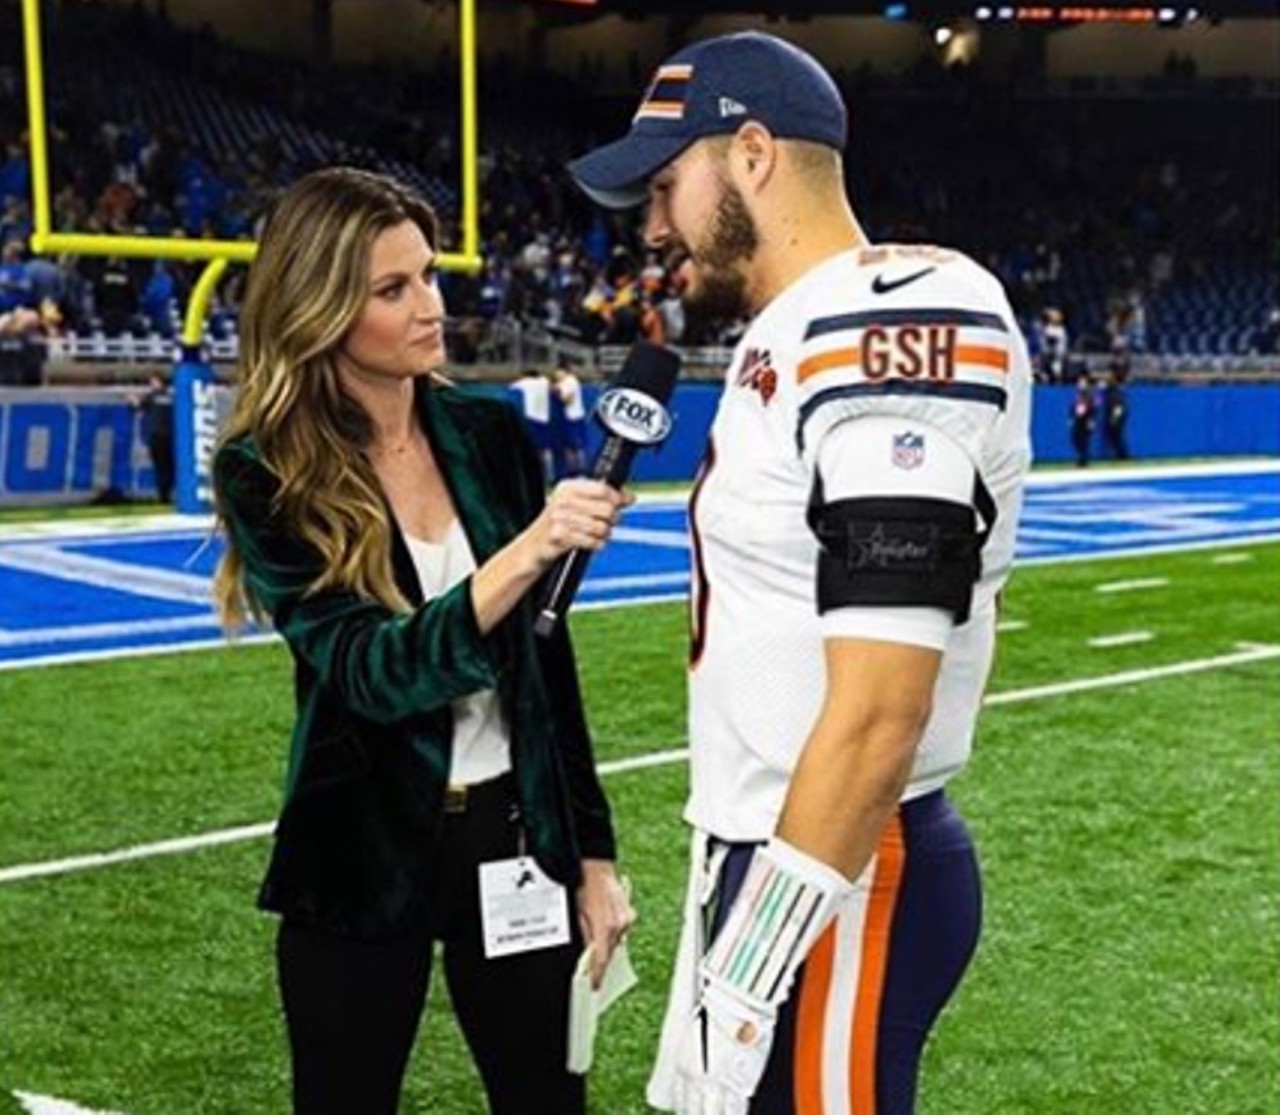 Erin Andrews - Bloomingdale (1996)
You can now find Andrews on the NFL sideline, interviewing athletes for Fox Sports, or as the host of &#147;Dancing With The Stars.&#148; She even owns a fashion line called &#147;WEAR by Erin Andrews.
Photo via @ErinAndrews/Instagram